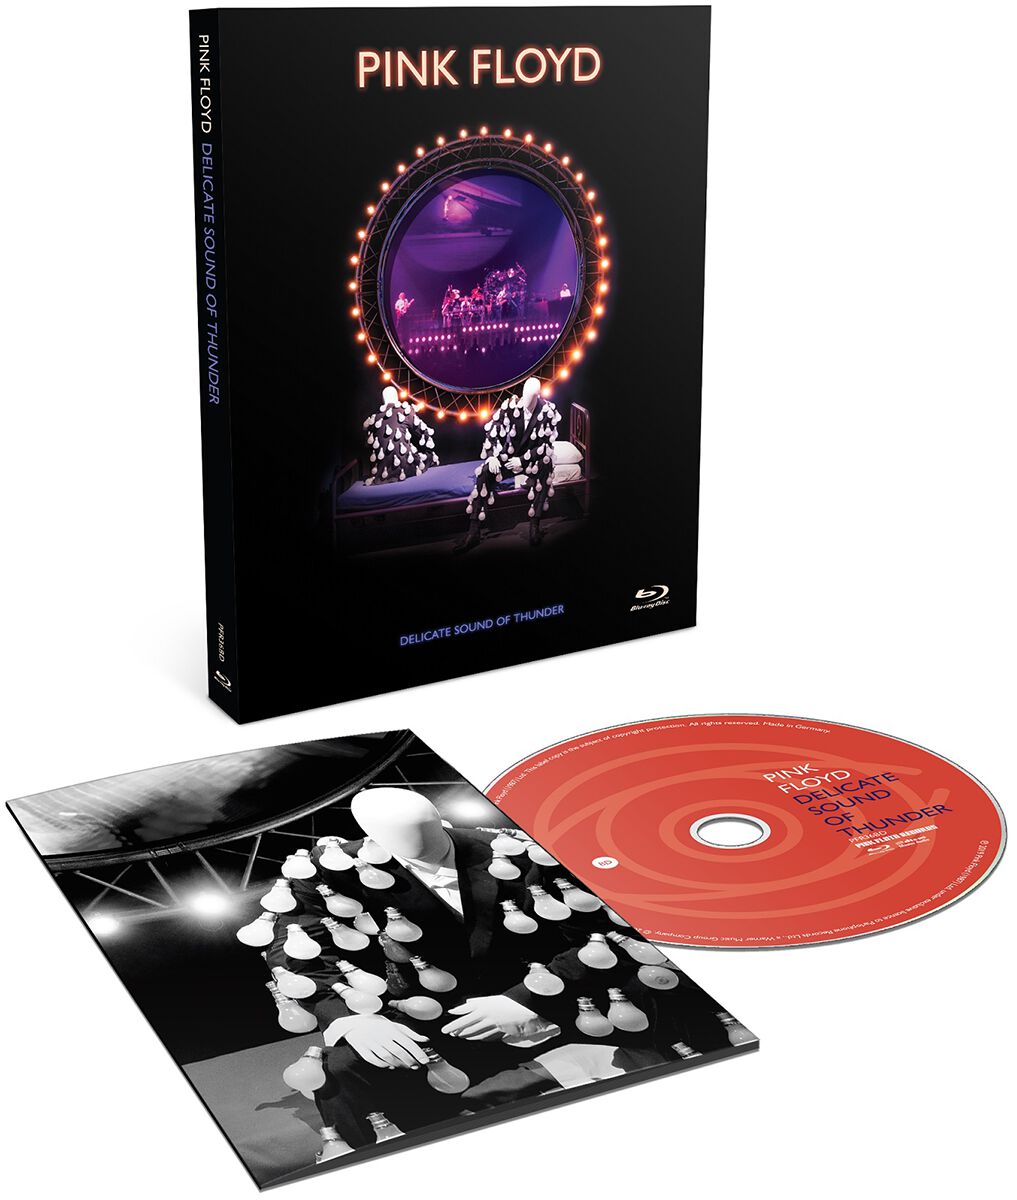 Pink Floyd Delicate sound of thunder Blu-Ray multicolor